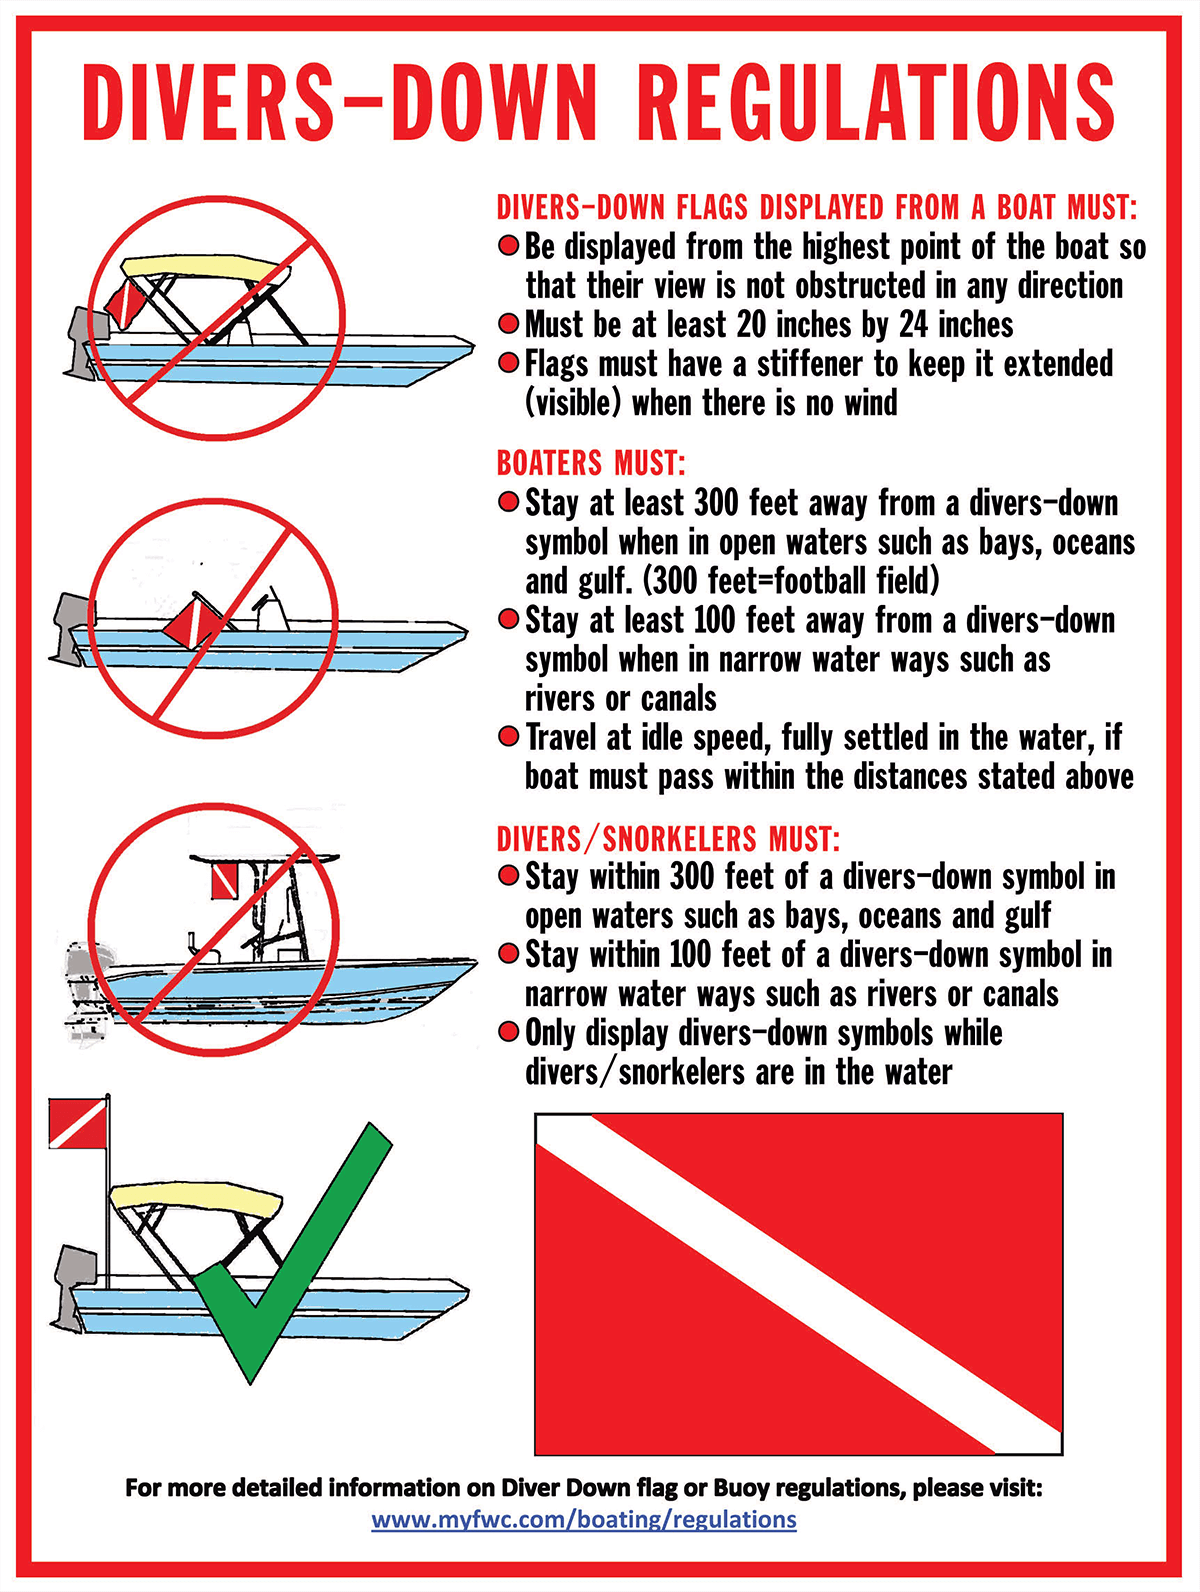 Dive Flag 101: Diver Down Flag Rules for Boaters and Divers